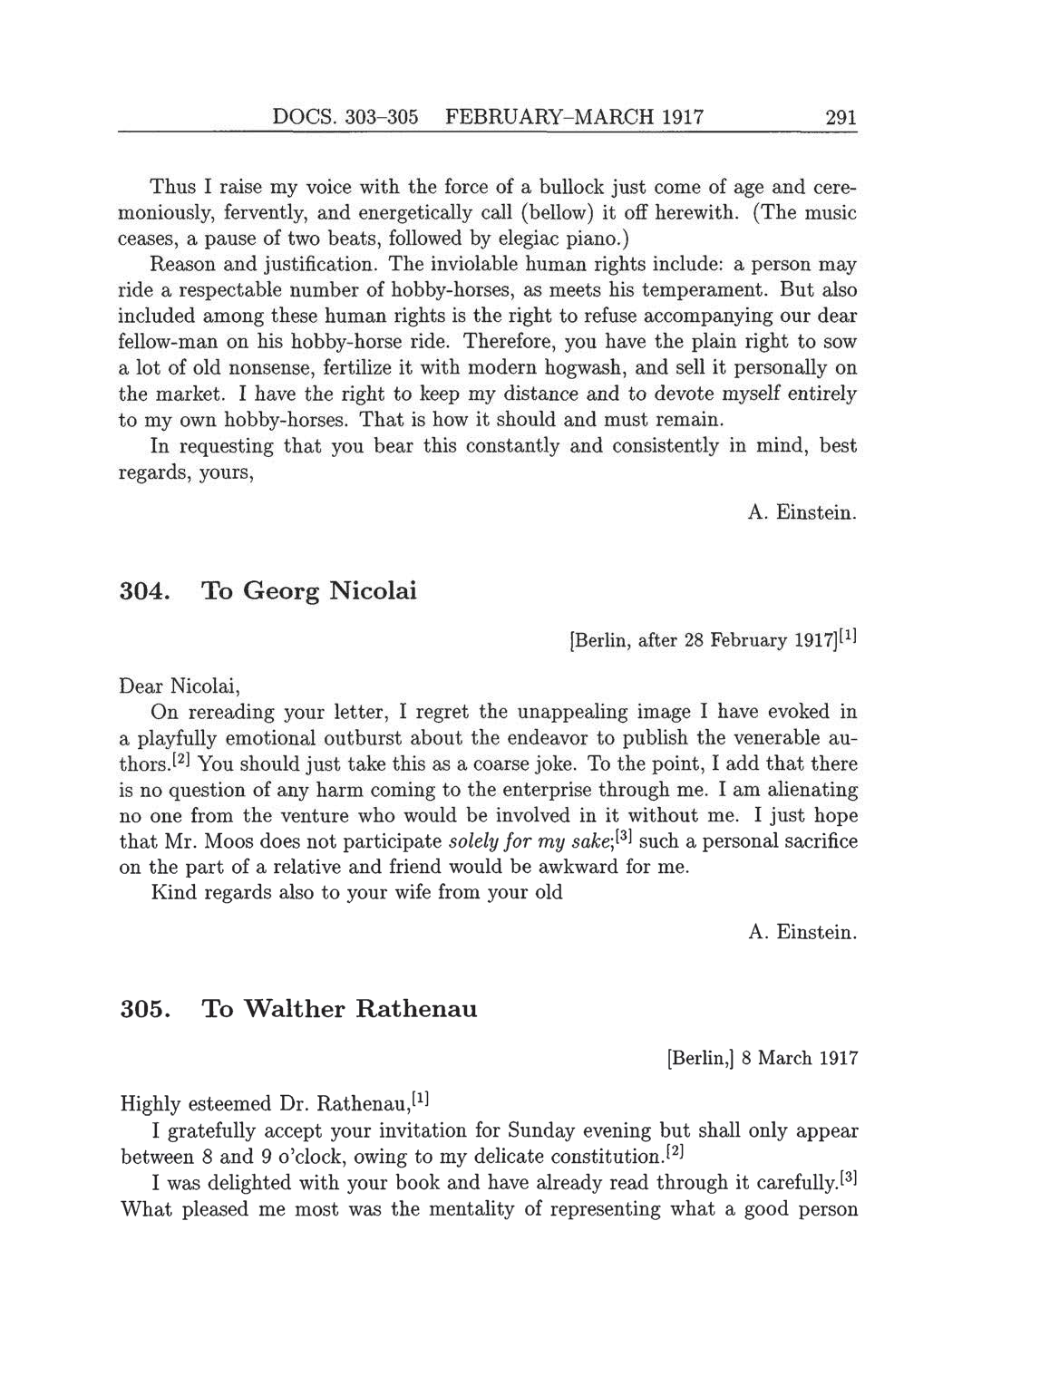 Volume 8: The Berlin Years: Correspondence, 1914-1918 (English translation supplement) page 291